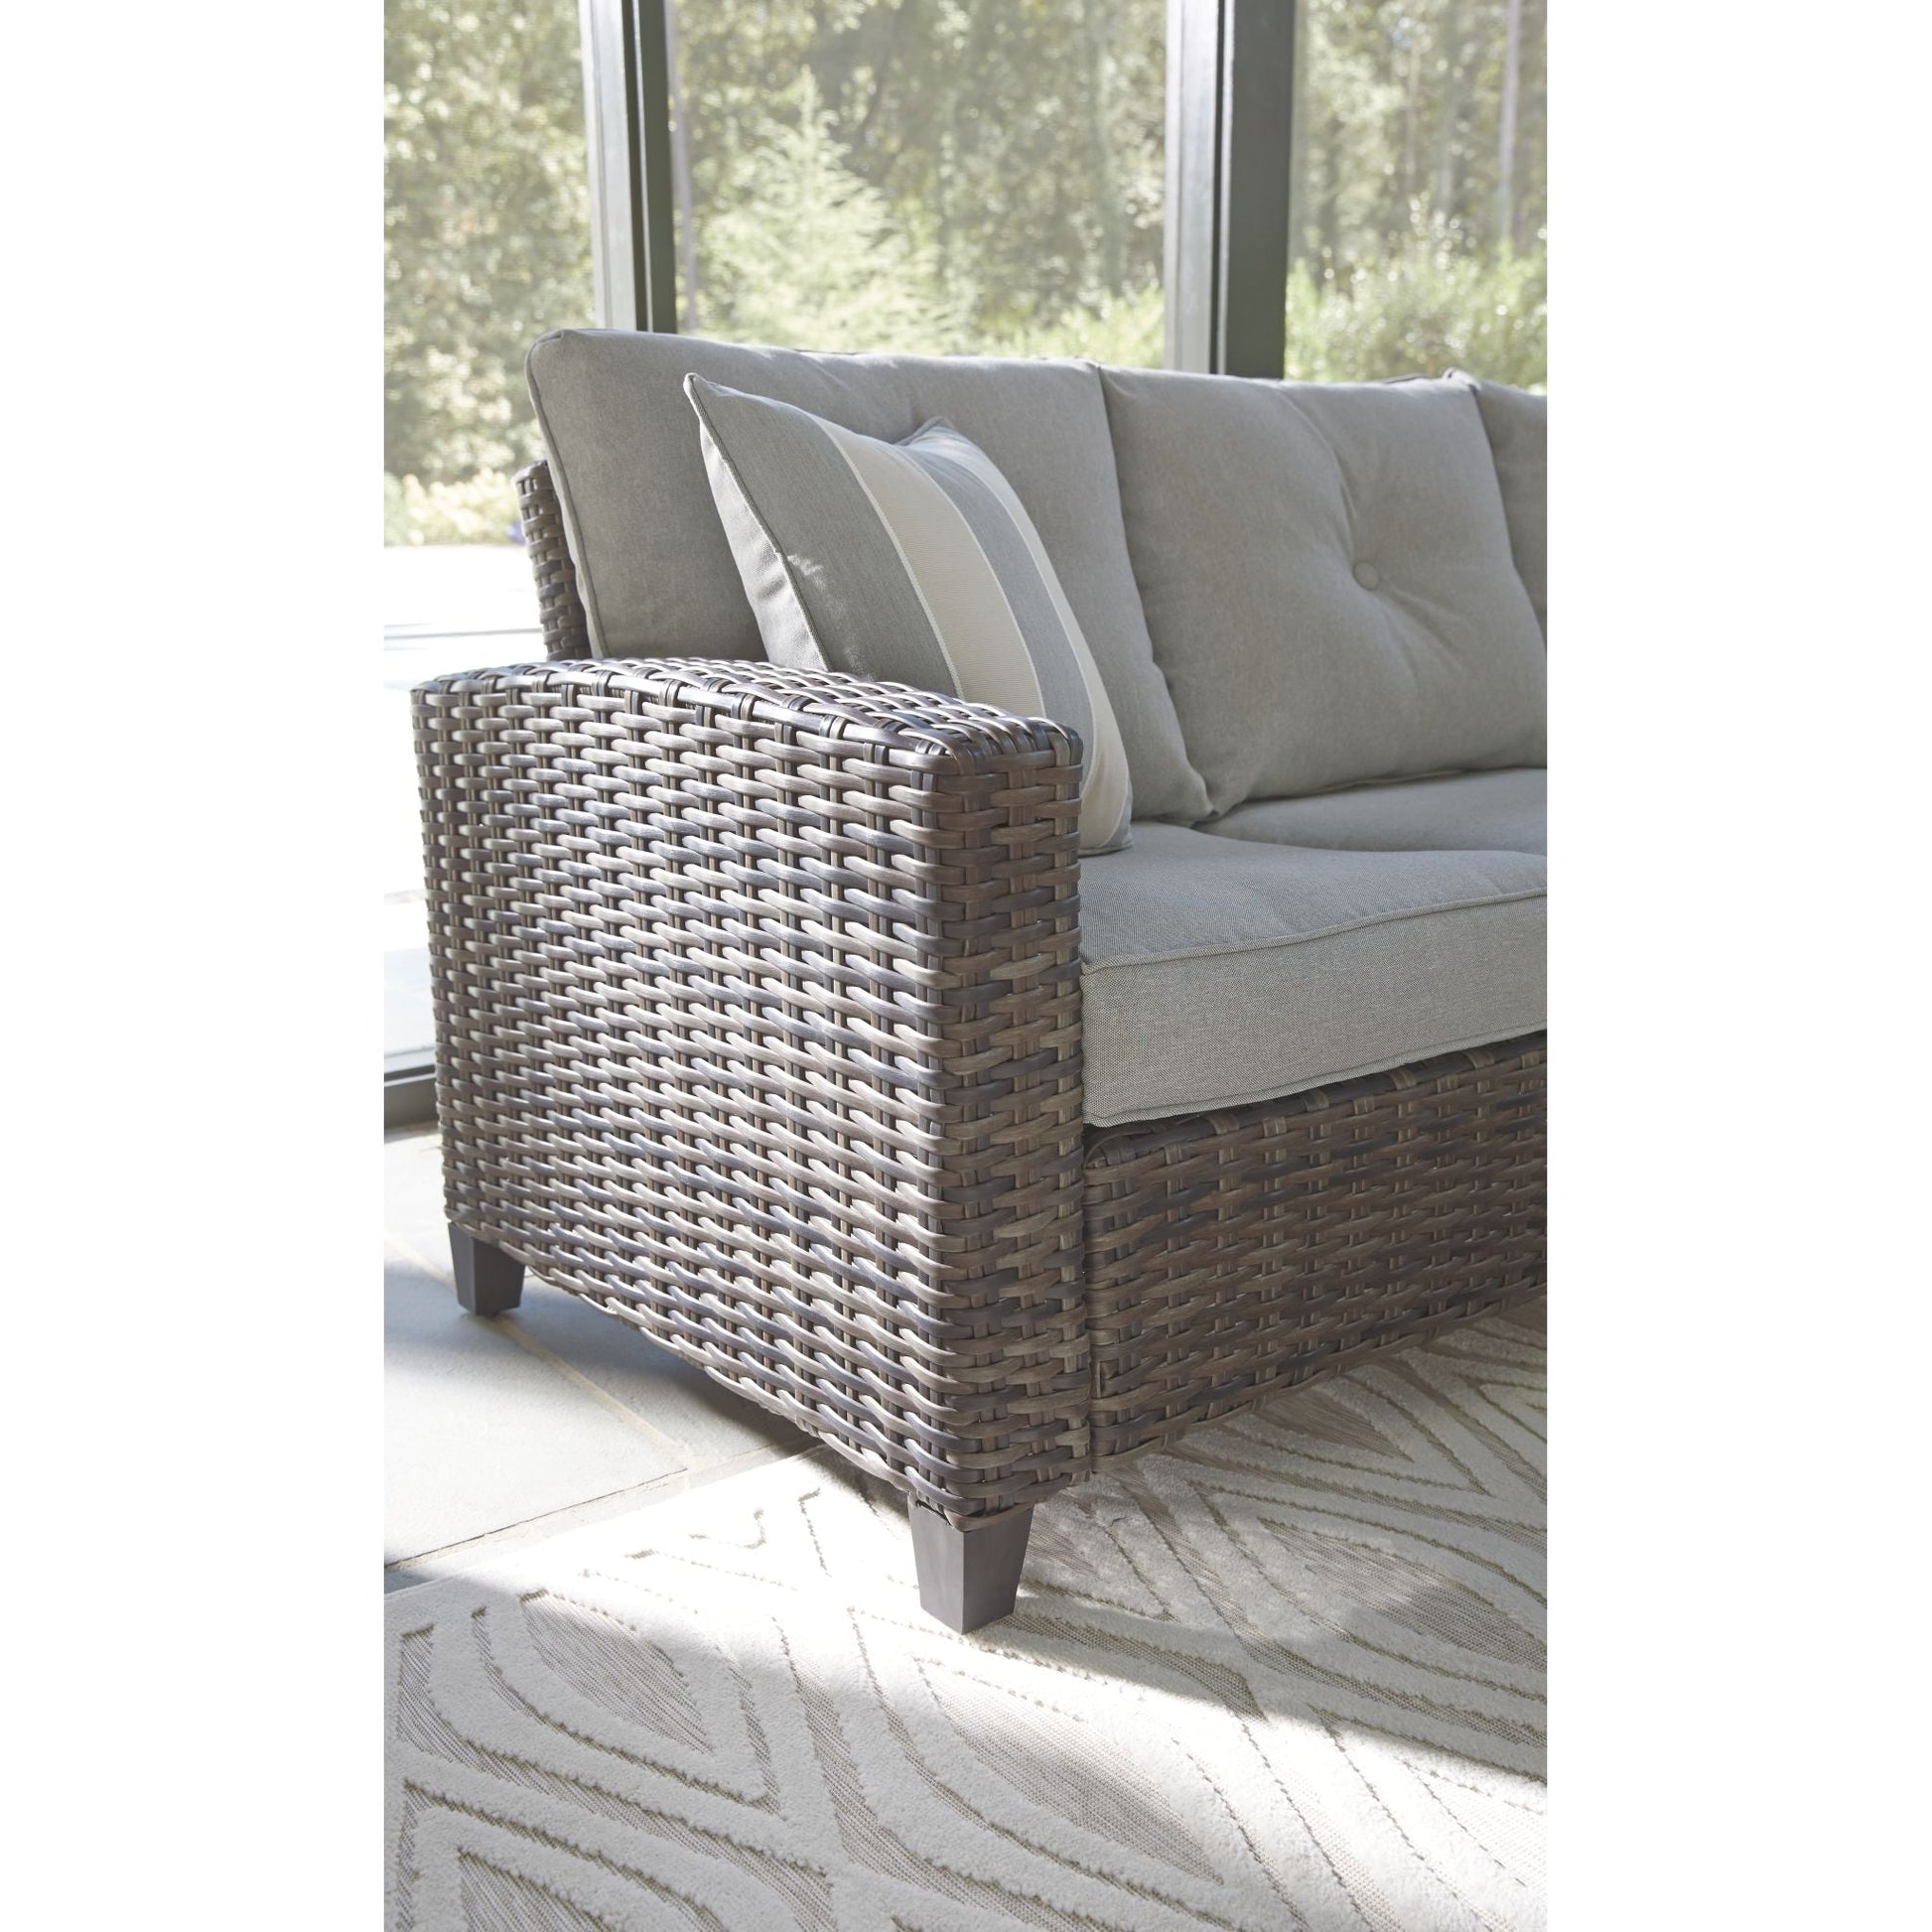 Outdoor Cloverbrooke Sofa, Pair of Chairs and Table Gray